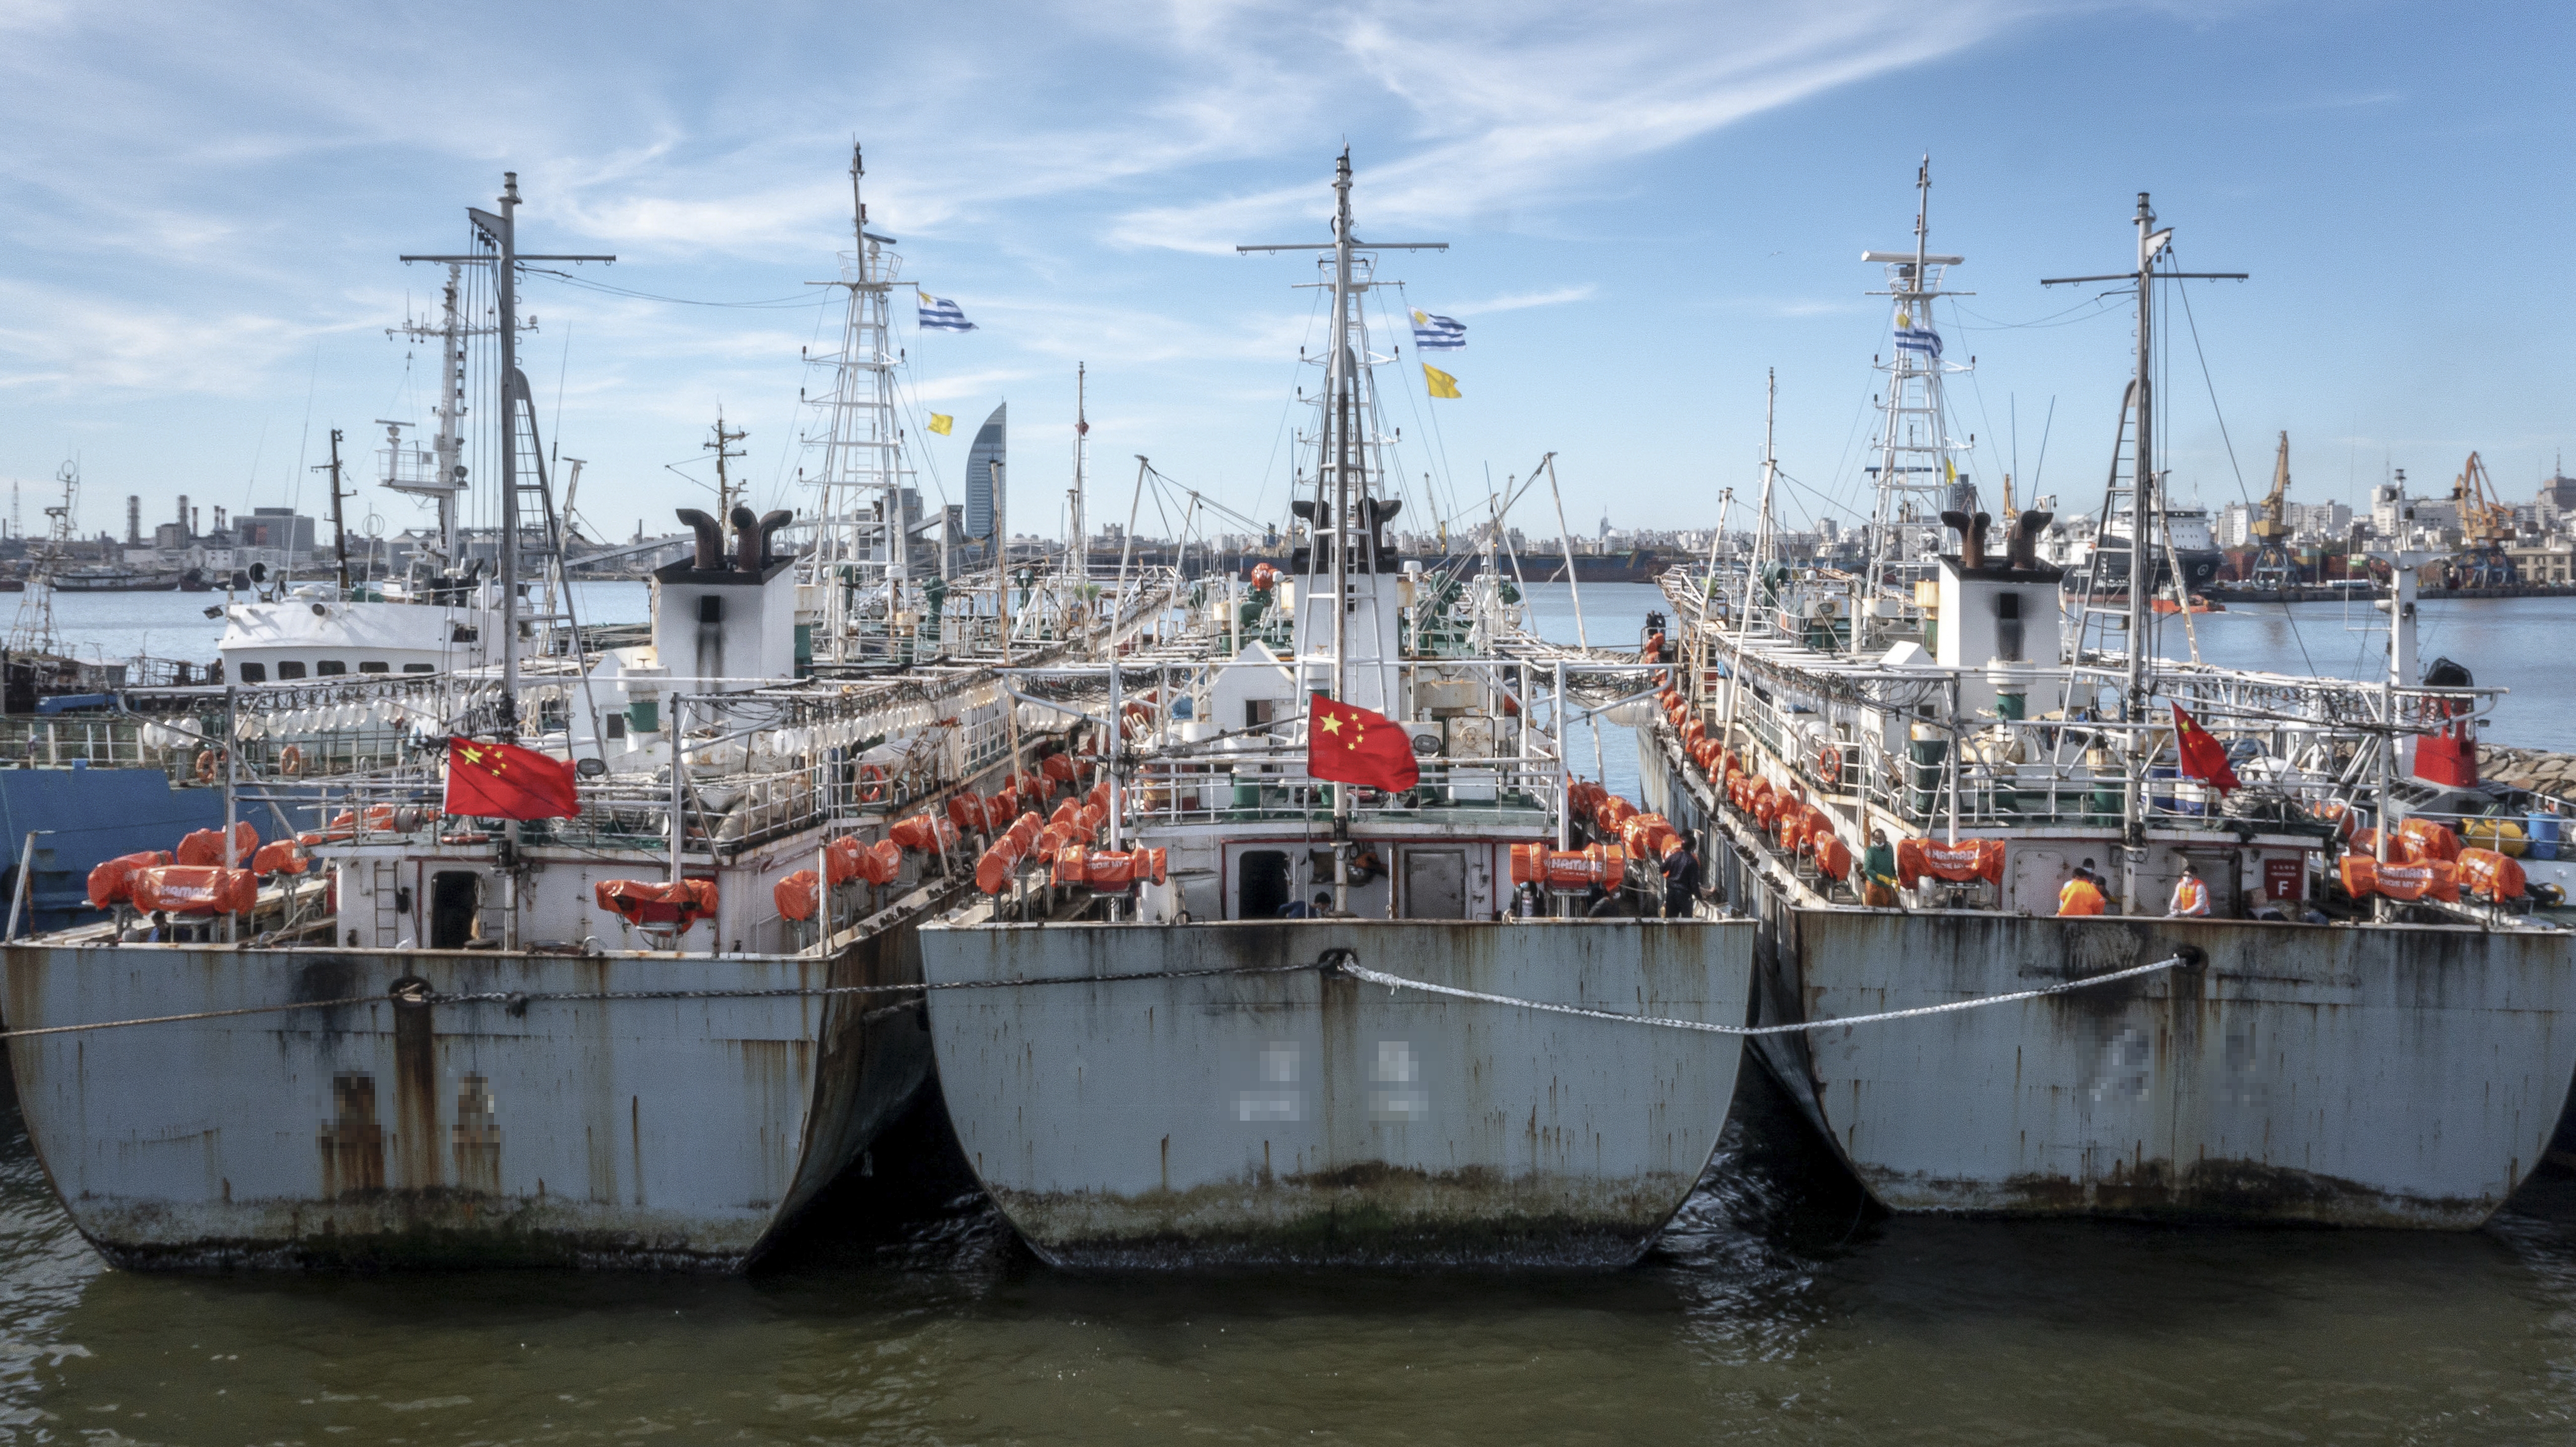 China’s fisheries policies foster a lack of transparency, allowing its fleet to run rampant